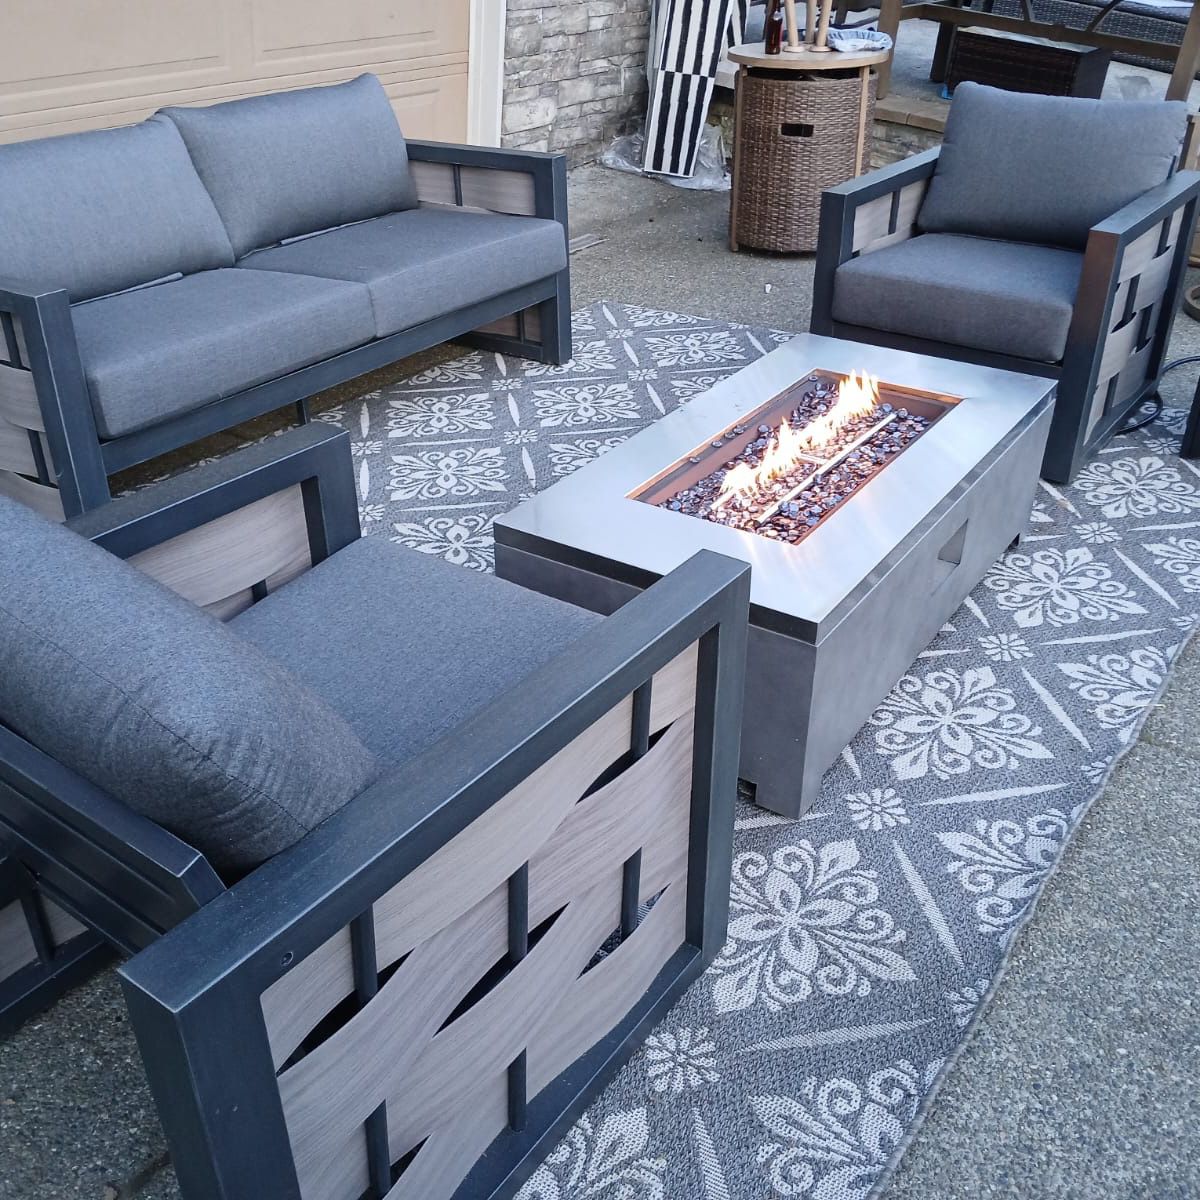 Costco Furniture With Fire Pit New 